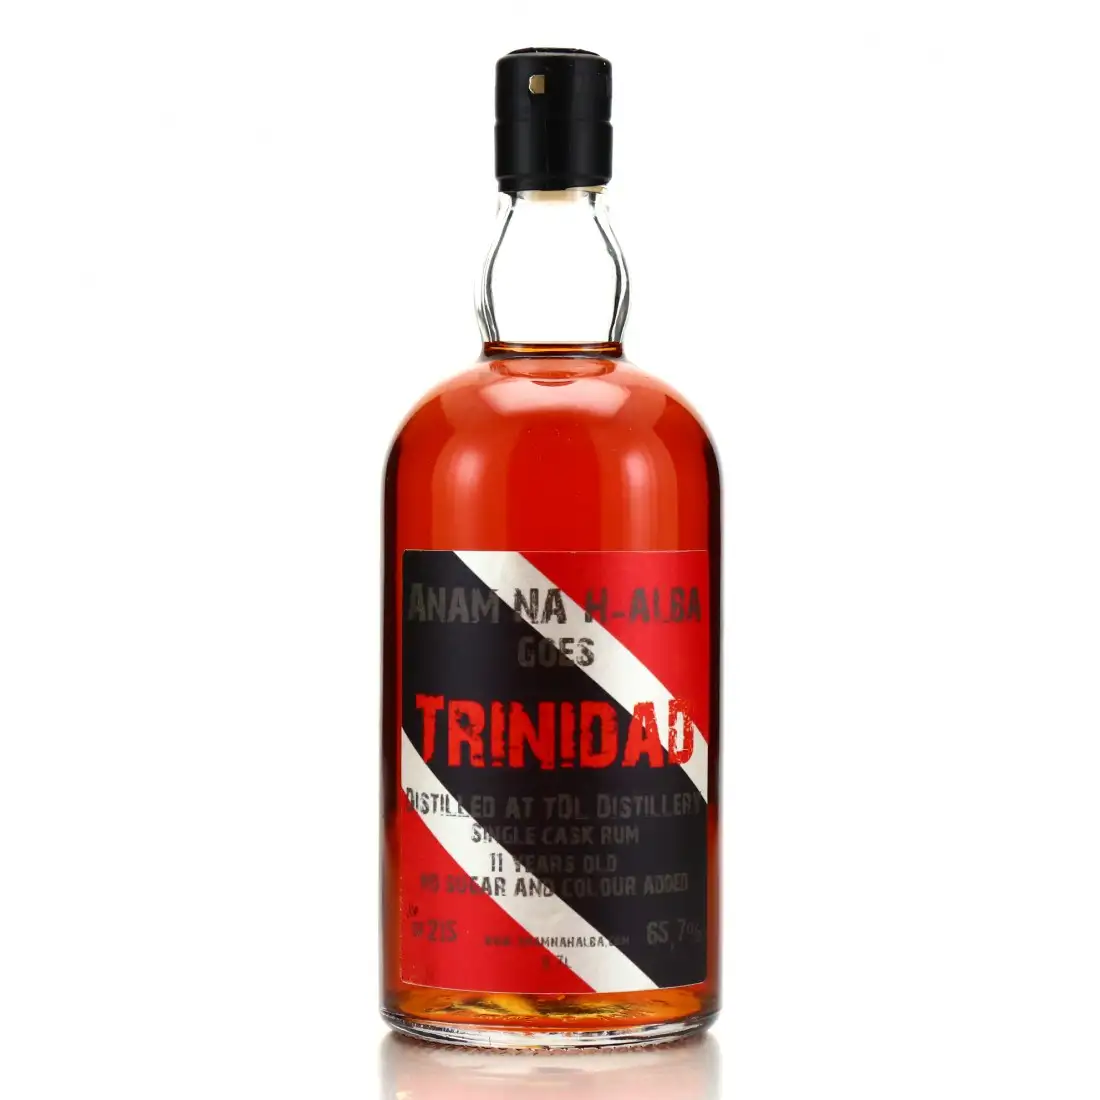 Image of the front of the bottle of the rum Trinidad Single Cask Rum